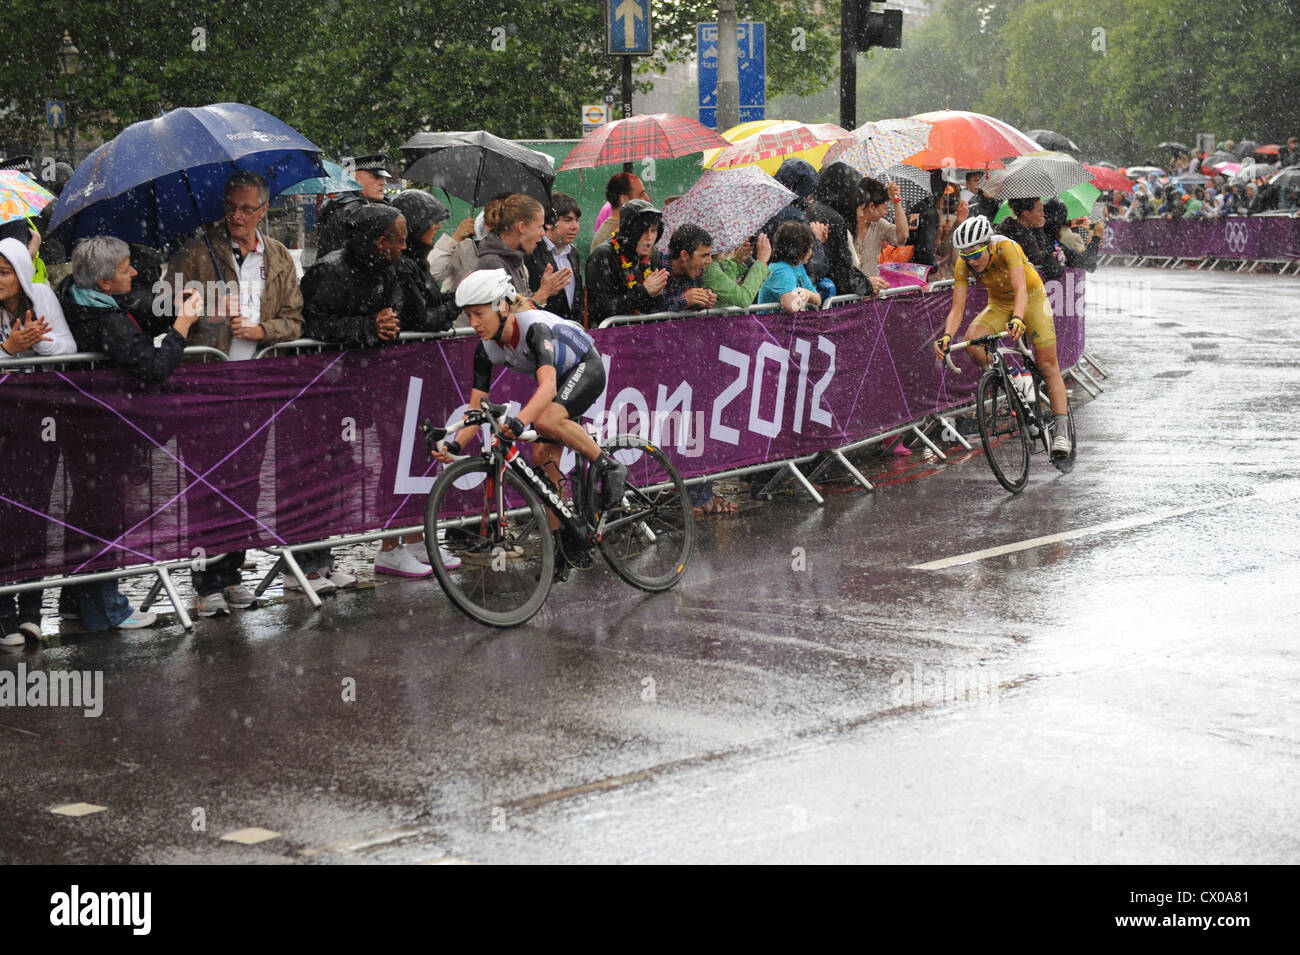 Emma Pooley and Shara Gillow in the women's cycling road race at the London 2012 Olympics Stock Photo